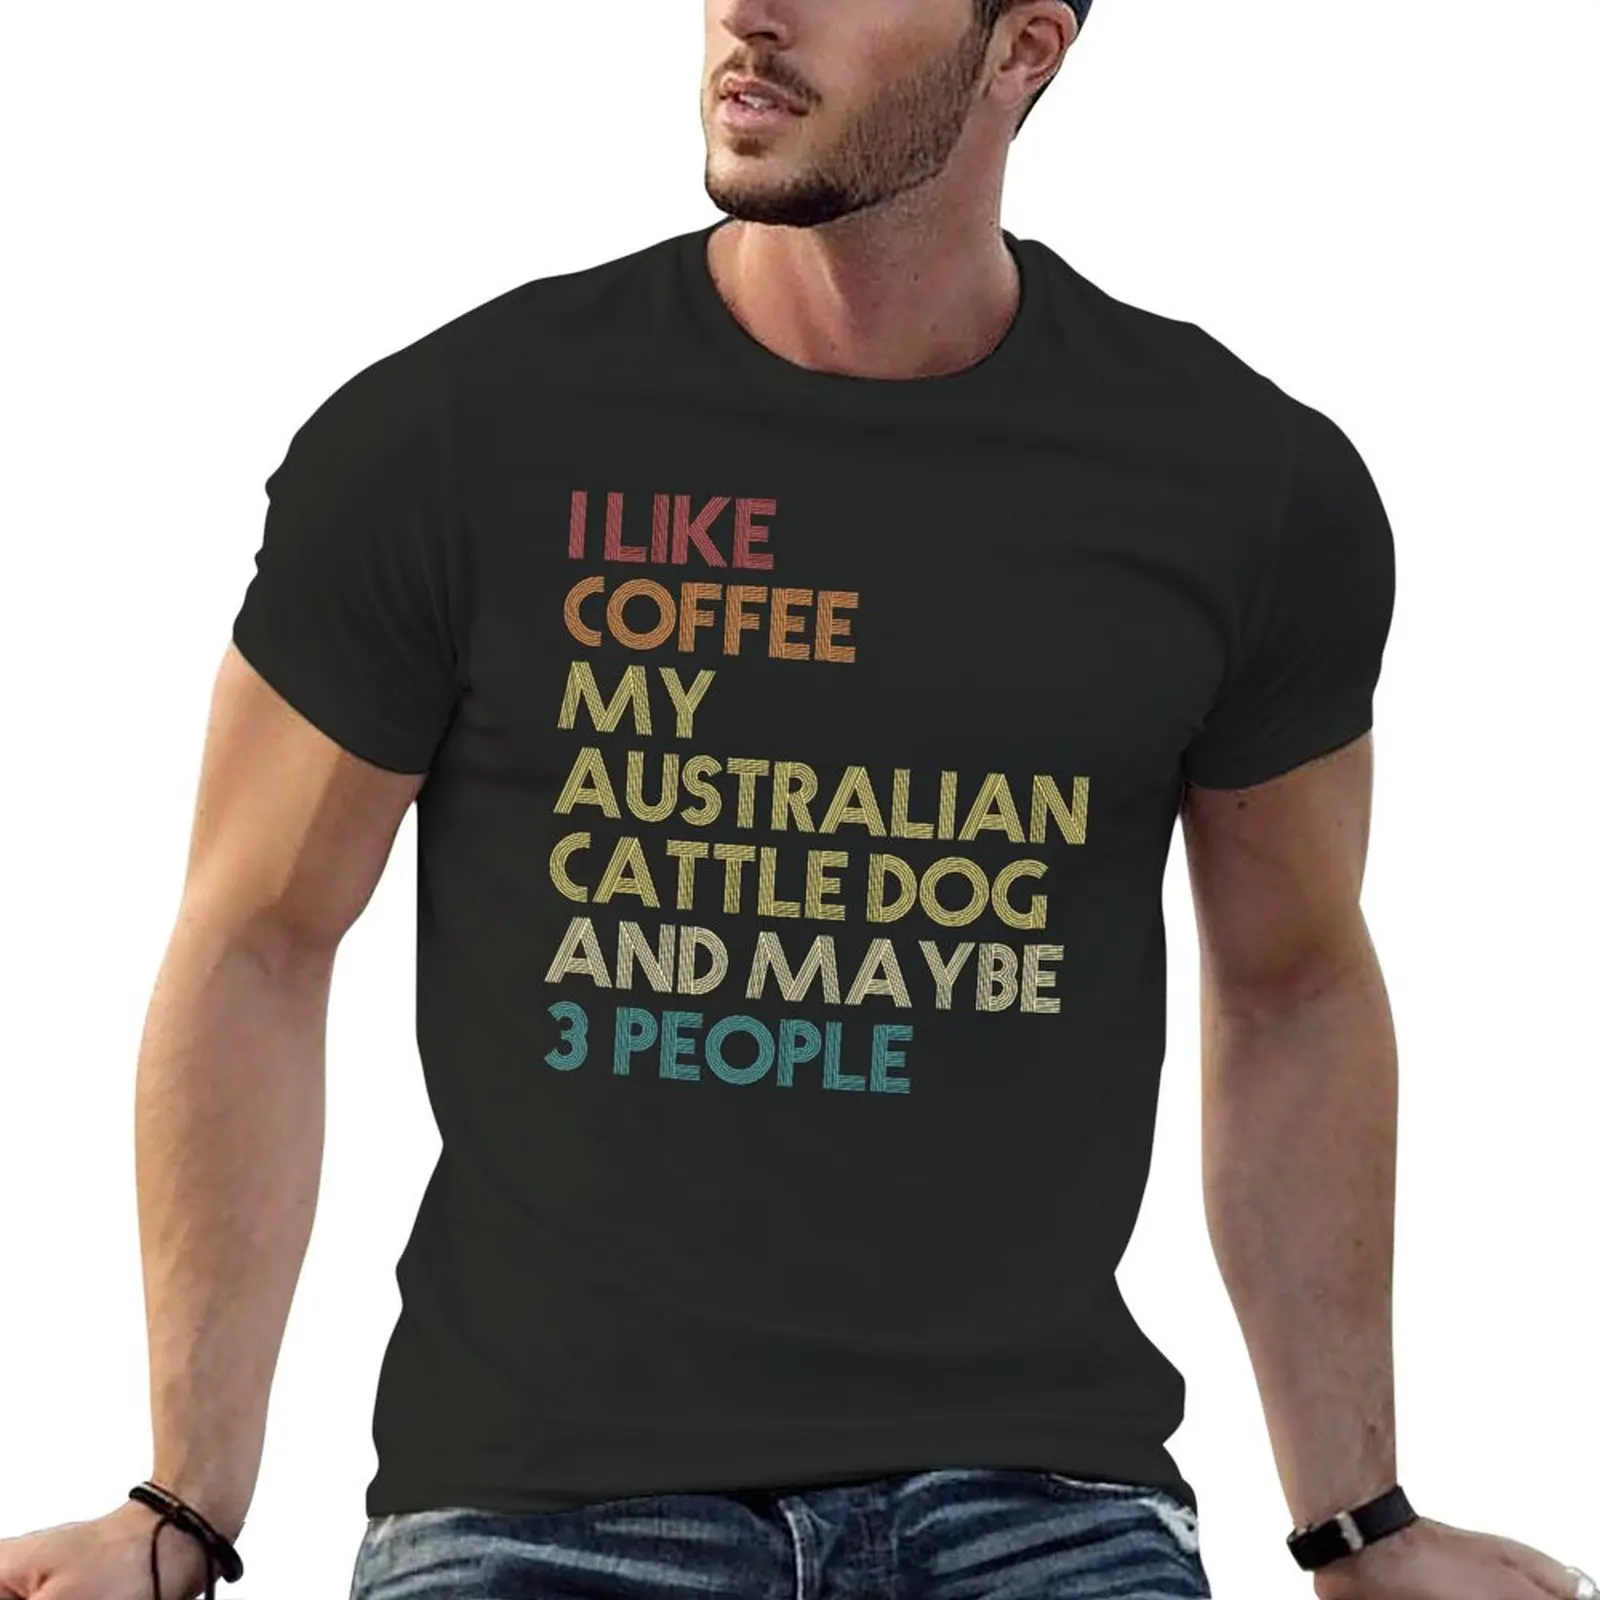 

Australian Cattle Dog Owner Coffee Lover Funny Vintage Retro T-shirt Aesthetic clothing plus size tops t shirts for men graphic